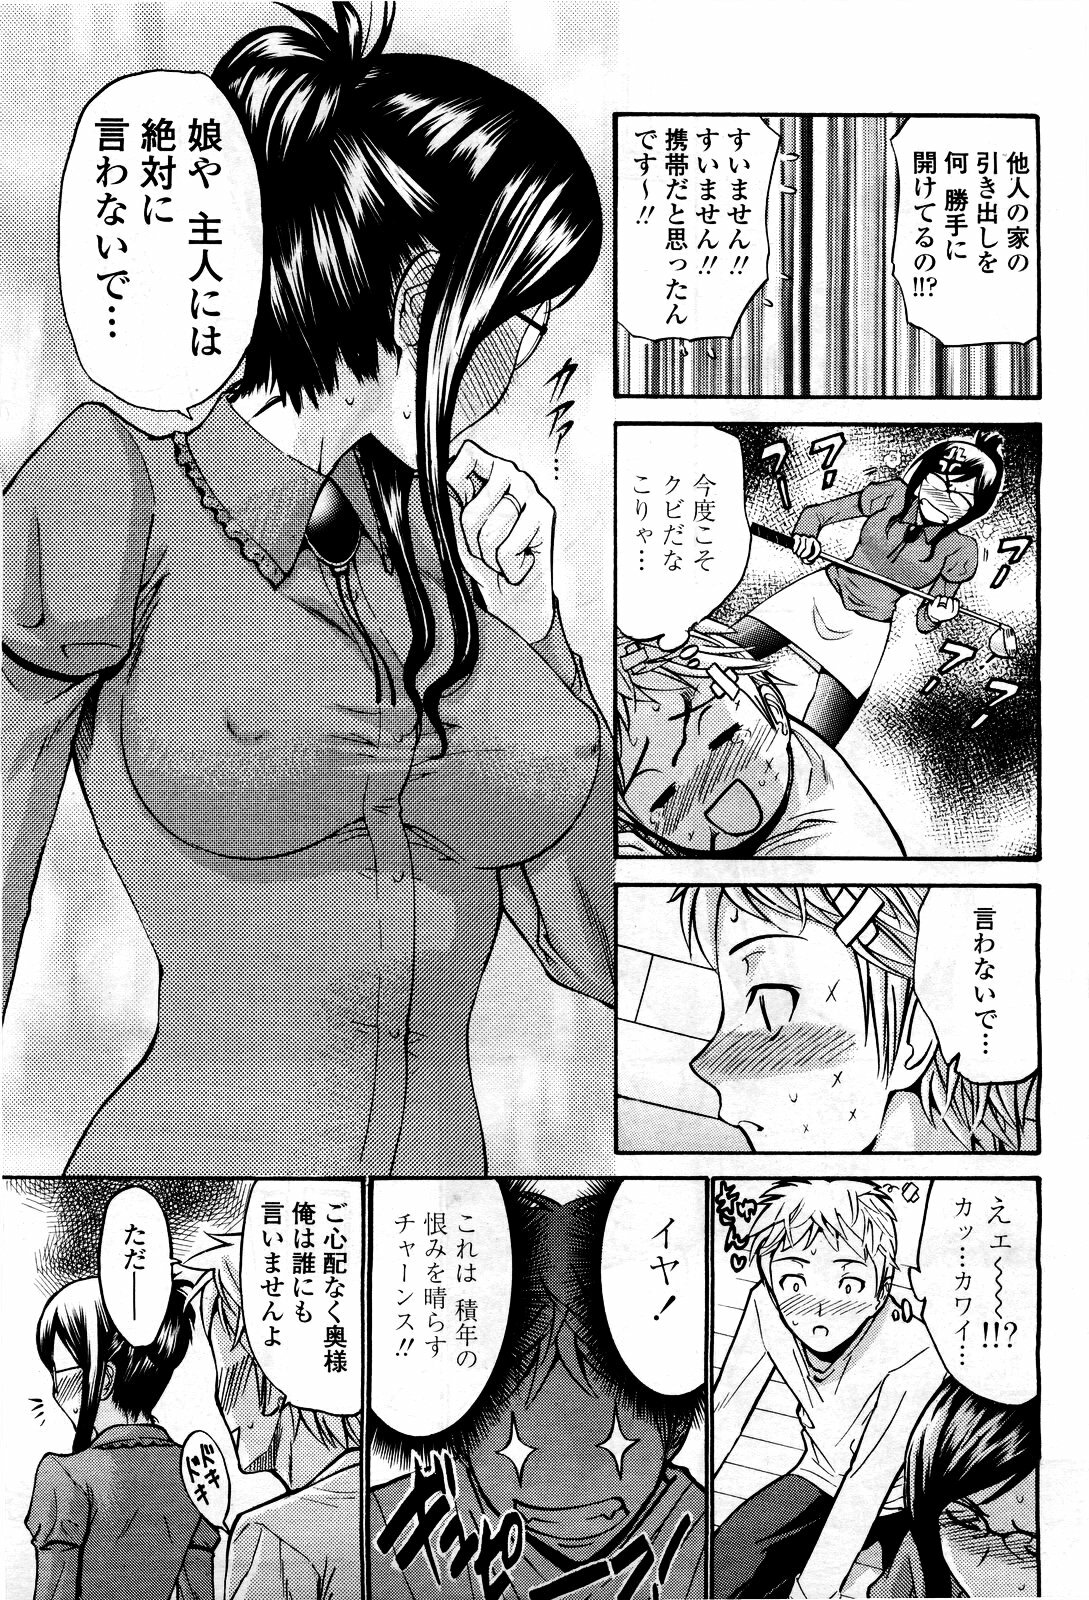 COMIC Momohime 2010-03 page 47 full